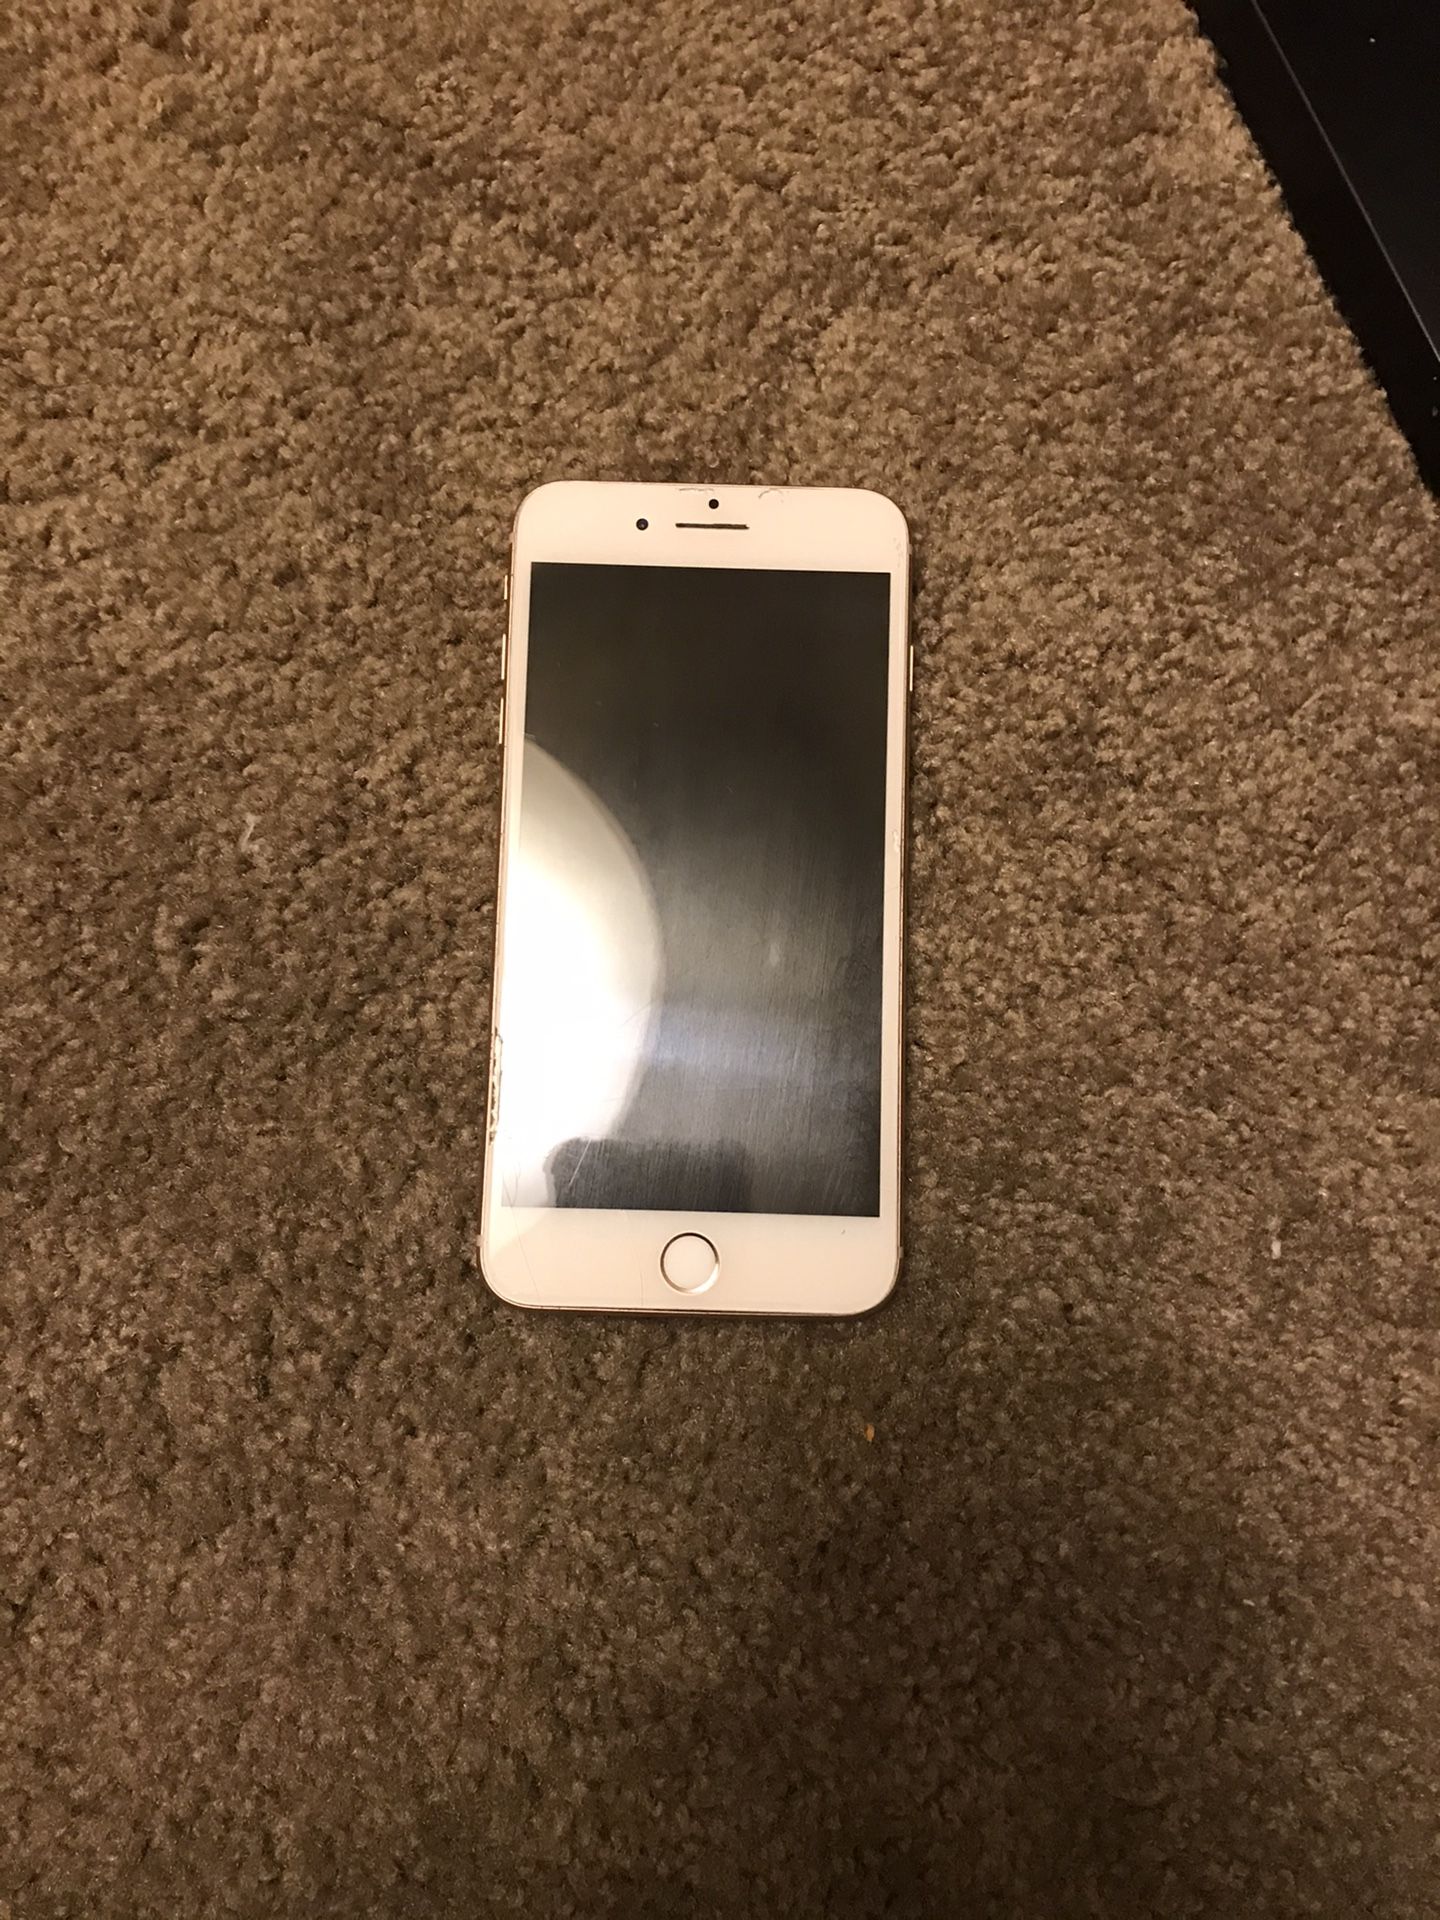 iPhone 8 Plus for sale selling for 200 a few cracks in the front & back maximum to get it fixed about 100 - 120 located in Vallejo ca